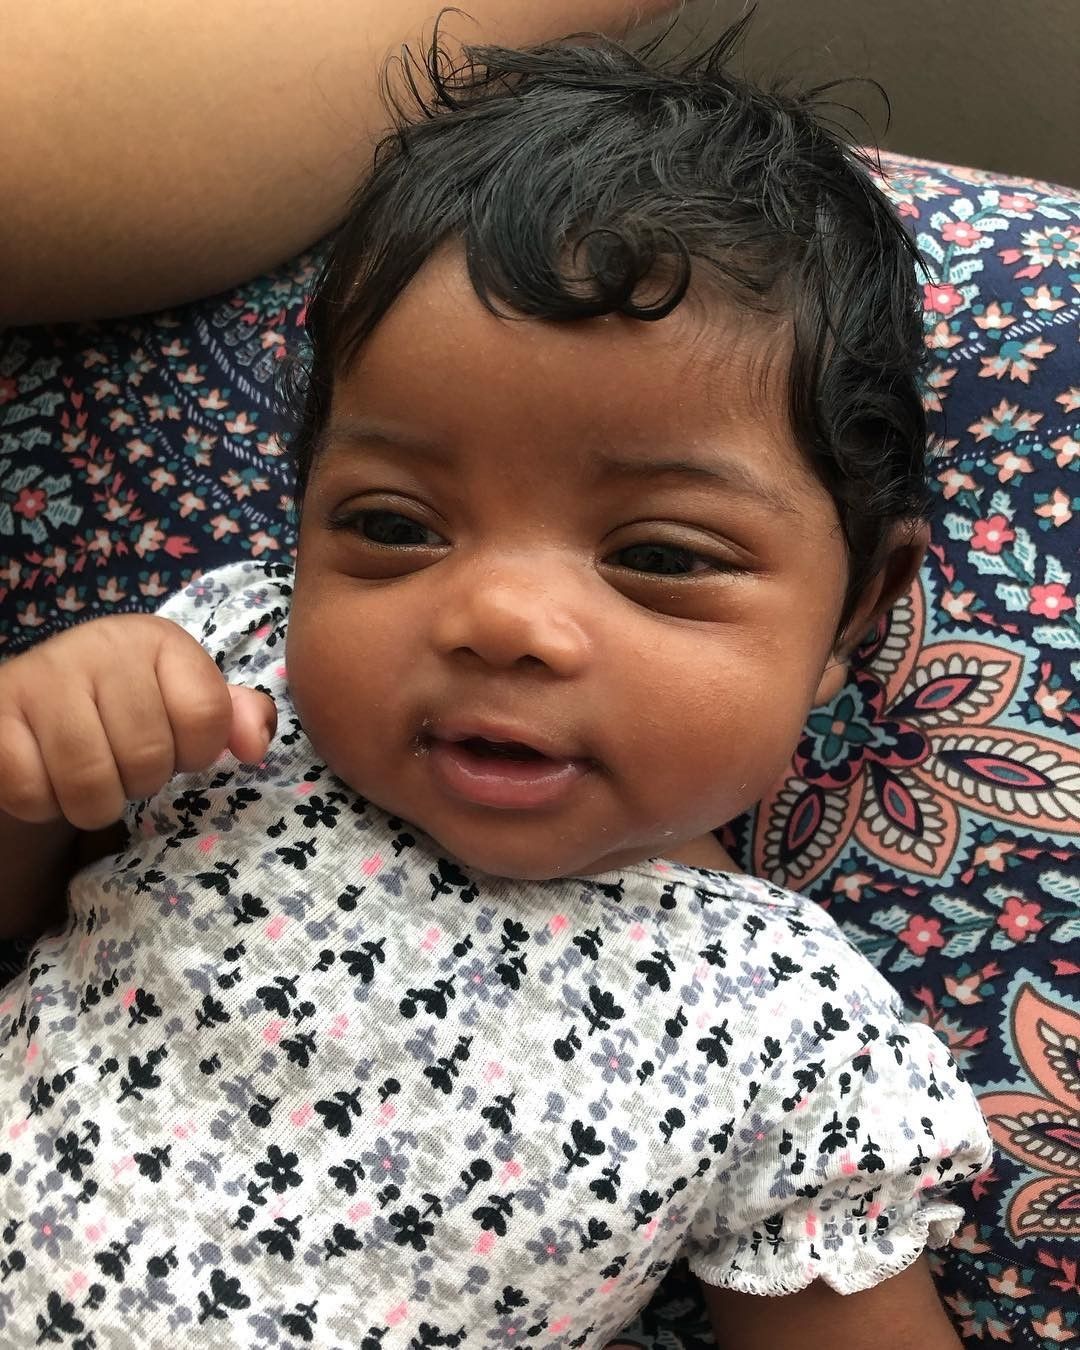 How should I care for my baby's hair?